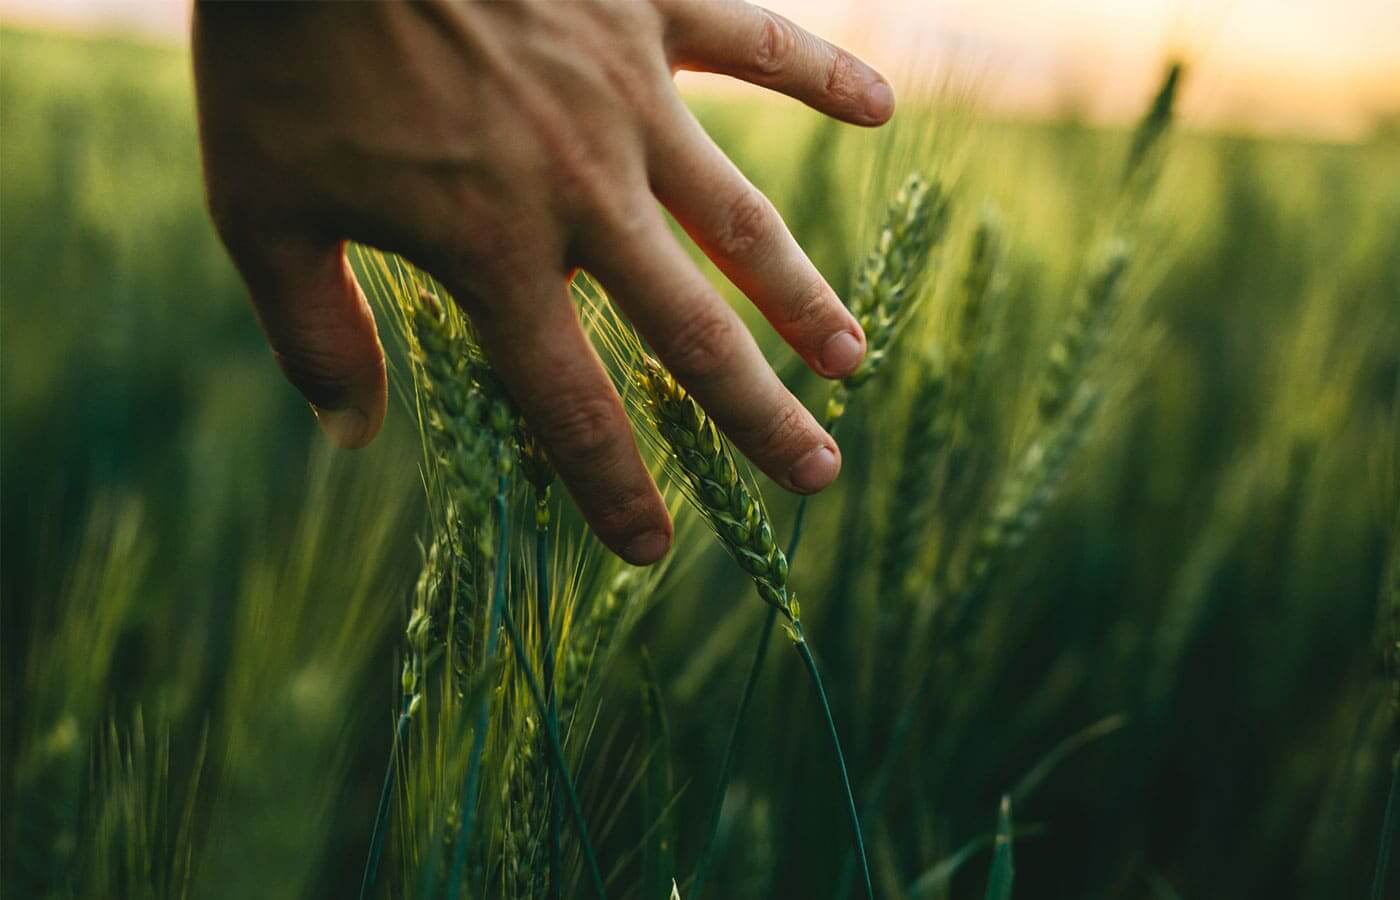 A farmer touching the wheat growing in a field